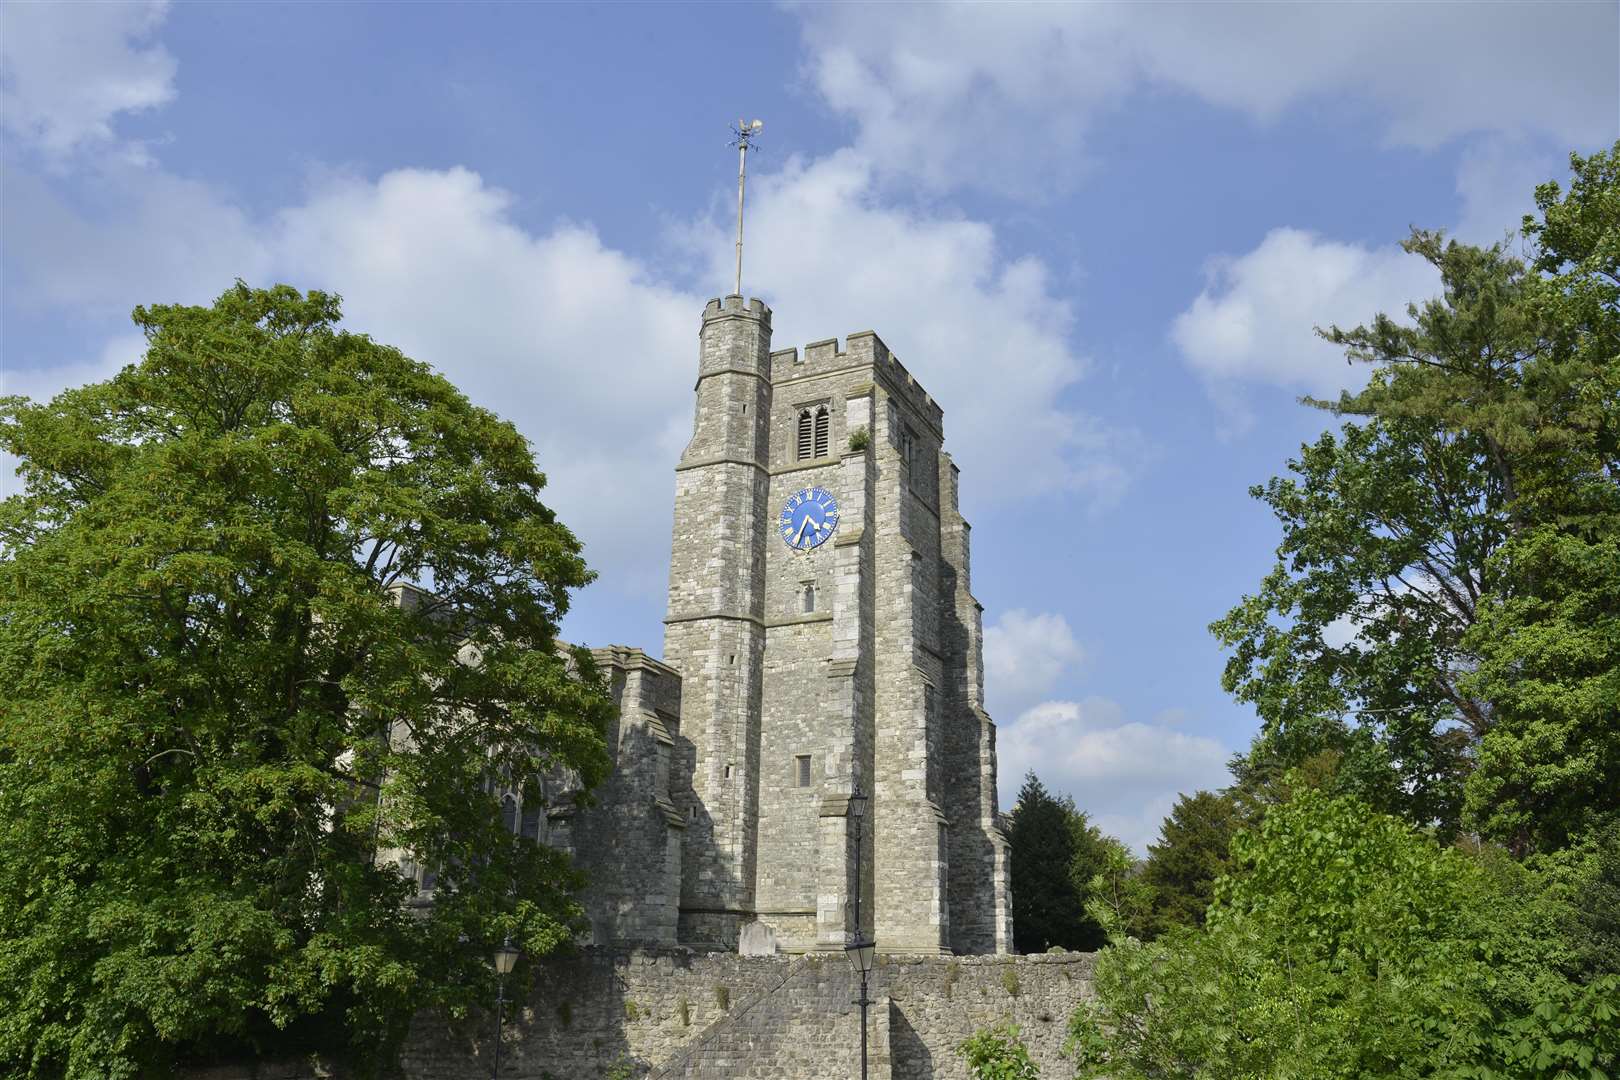 Organisers hope to raise the roof at All Saints Church in Maidstone. Picture: Martin Apps